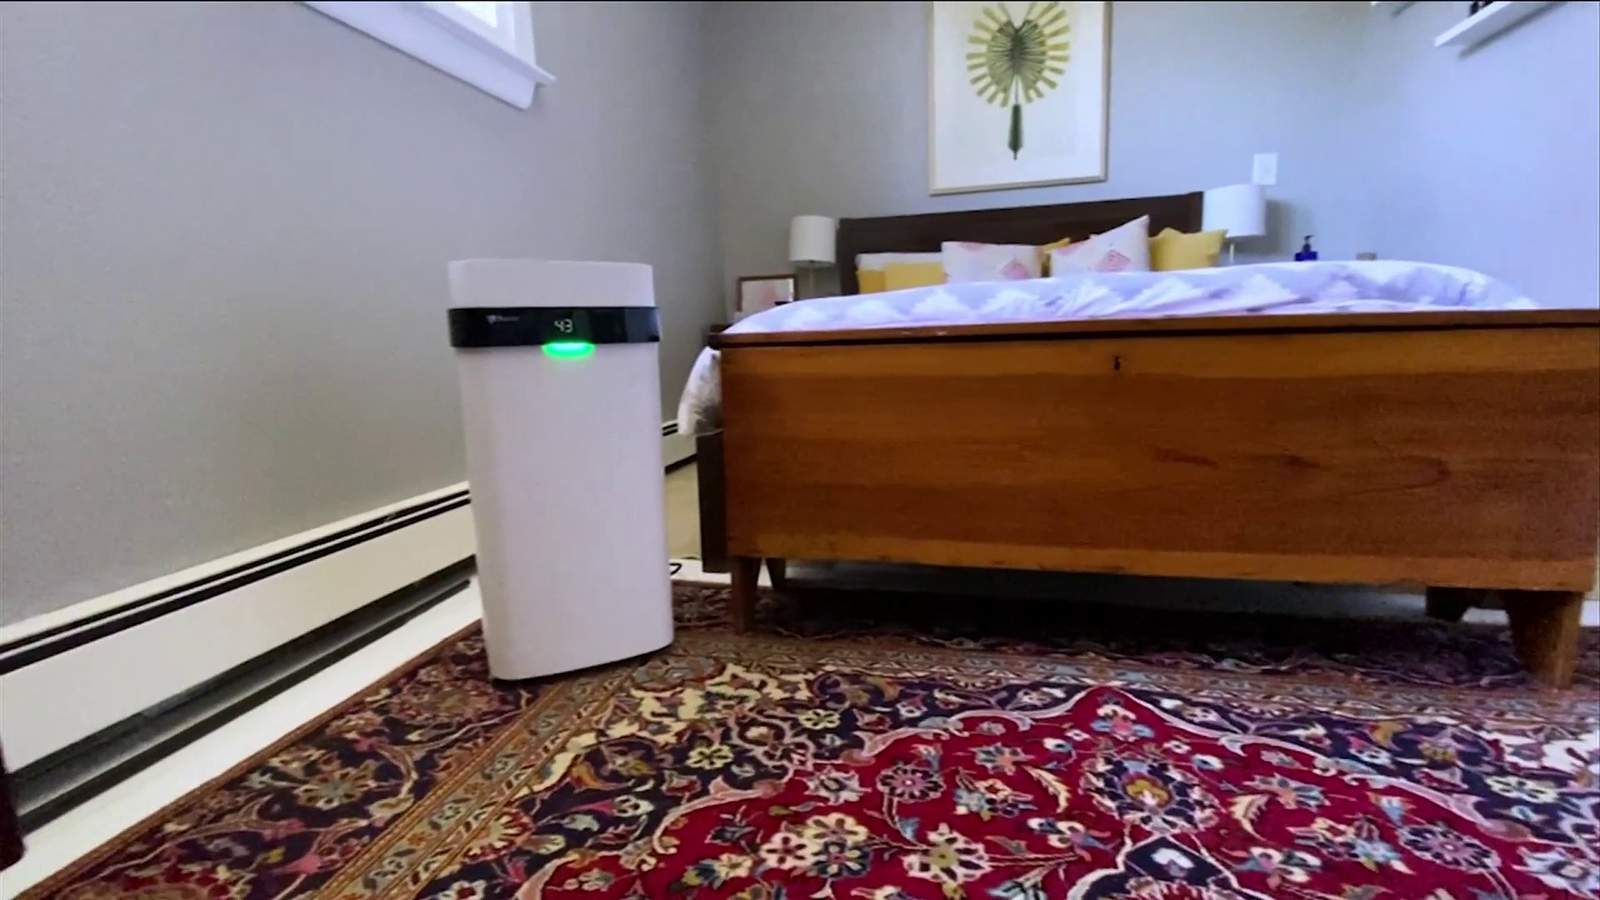 COVID-19 has people worrying about indoor air quality, can air purifiers help?